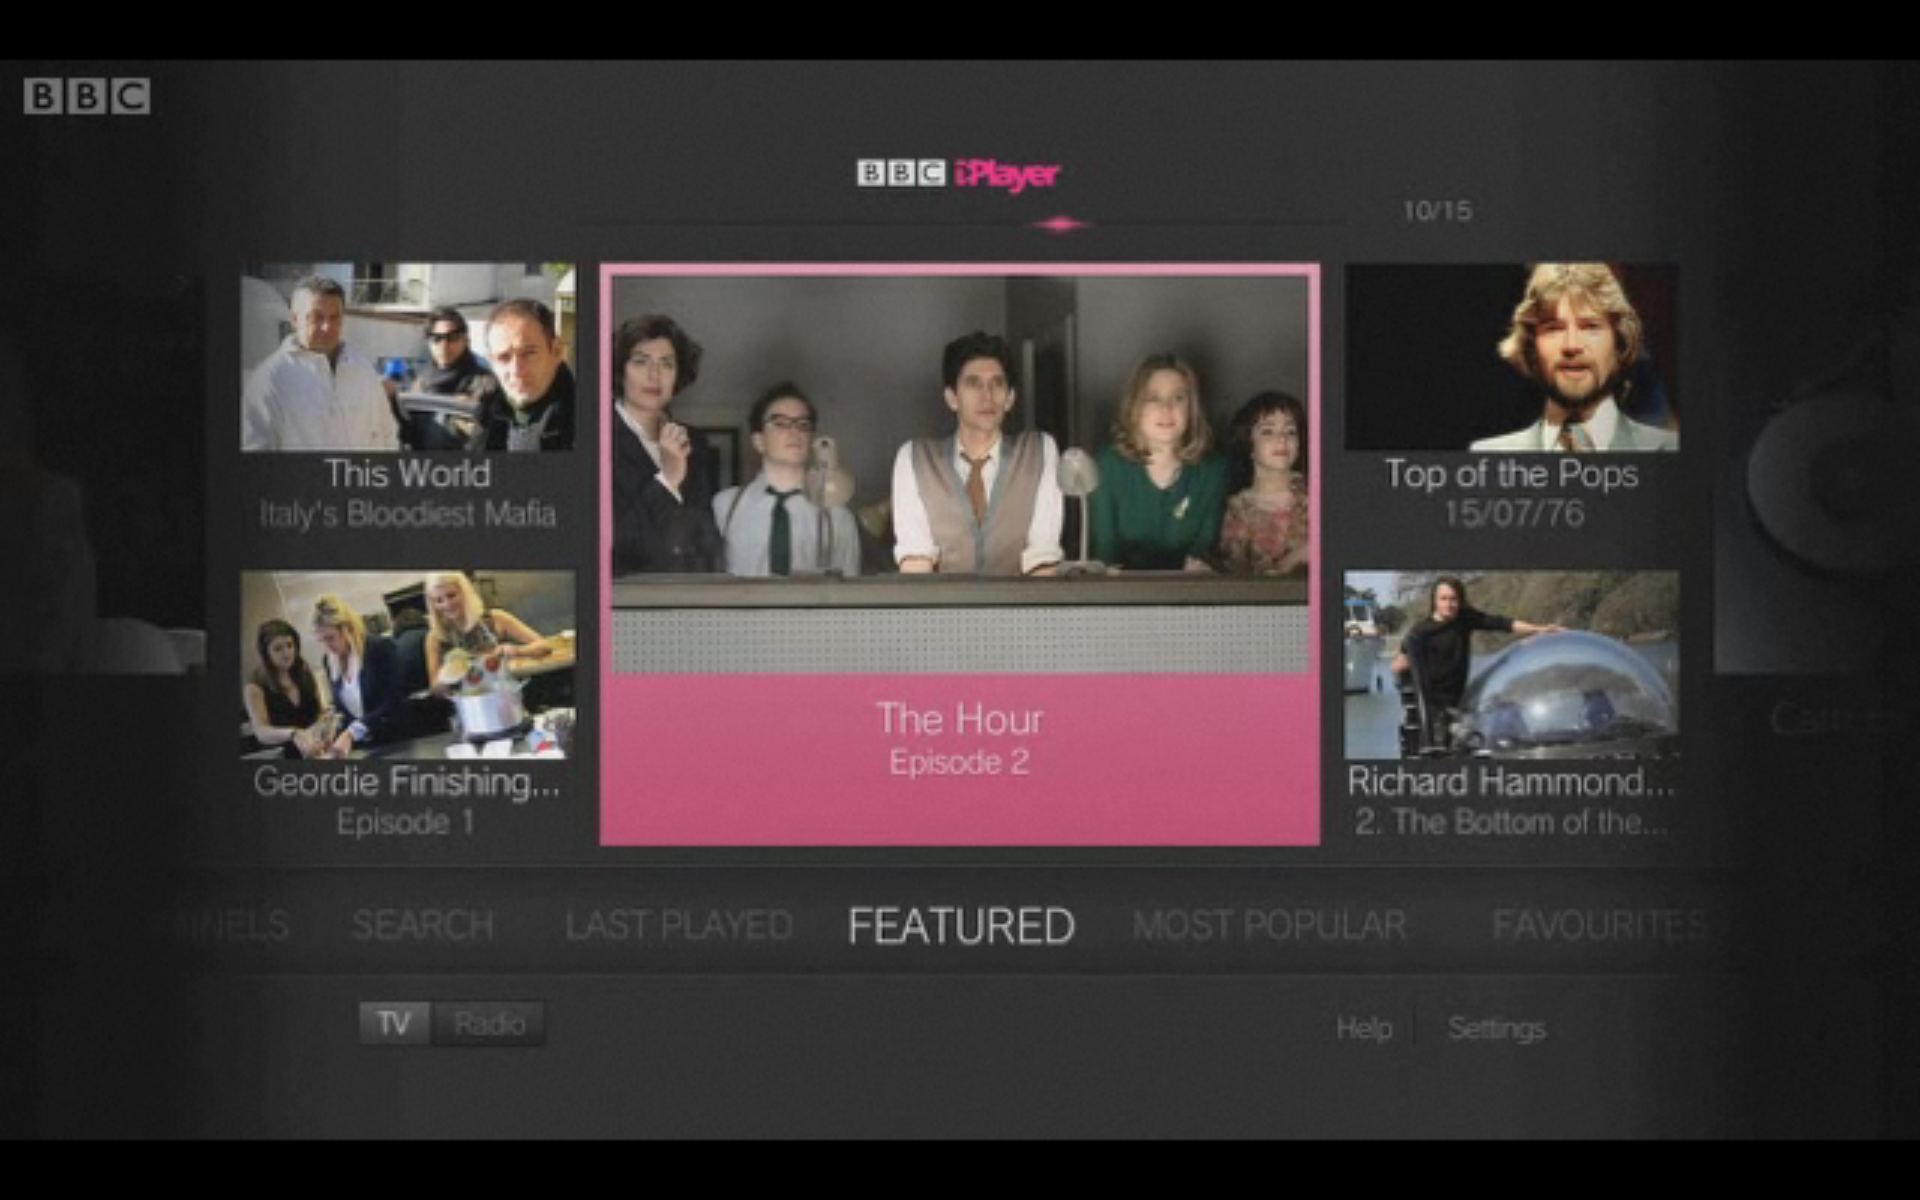 The new BBC iPlayer for TV